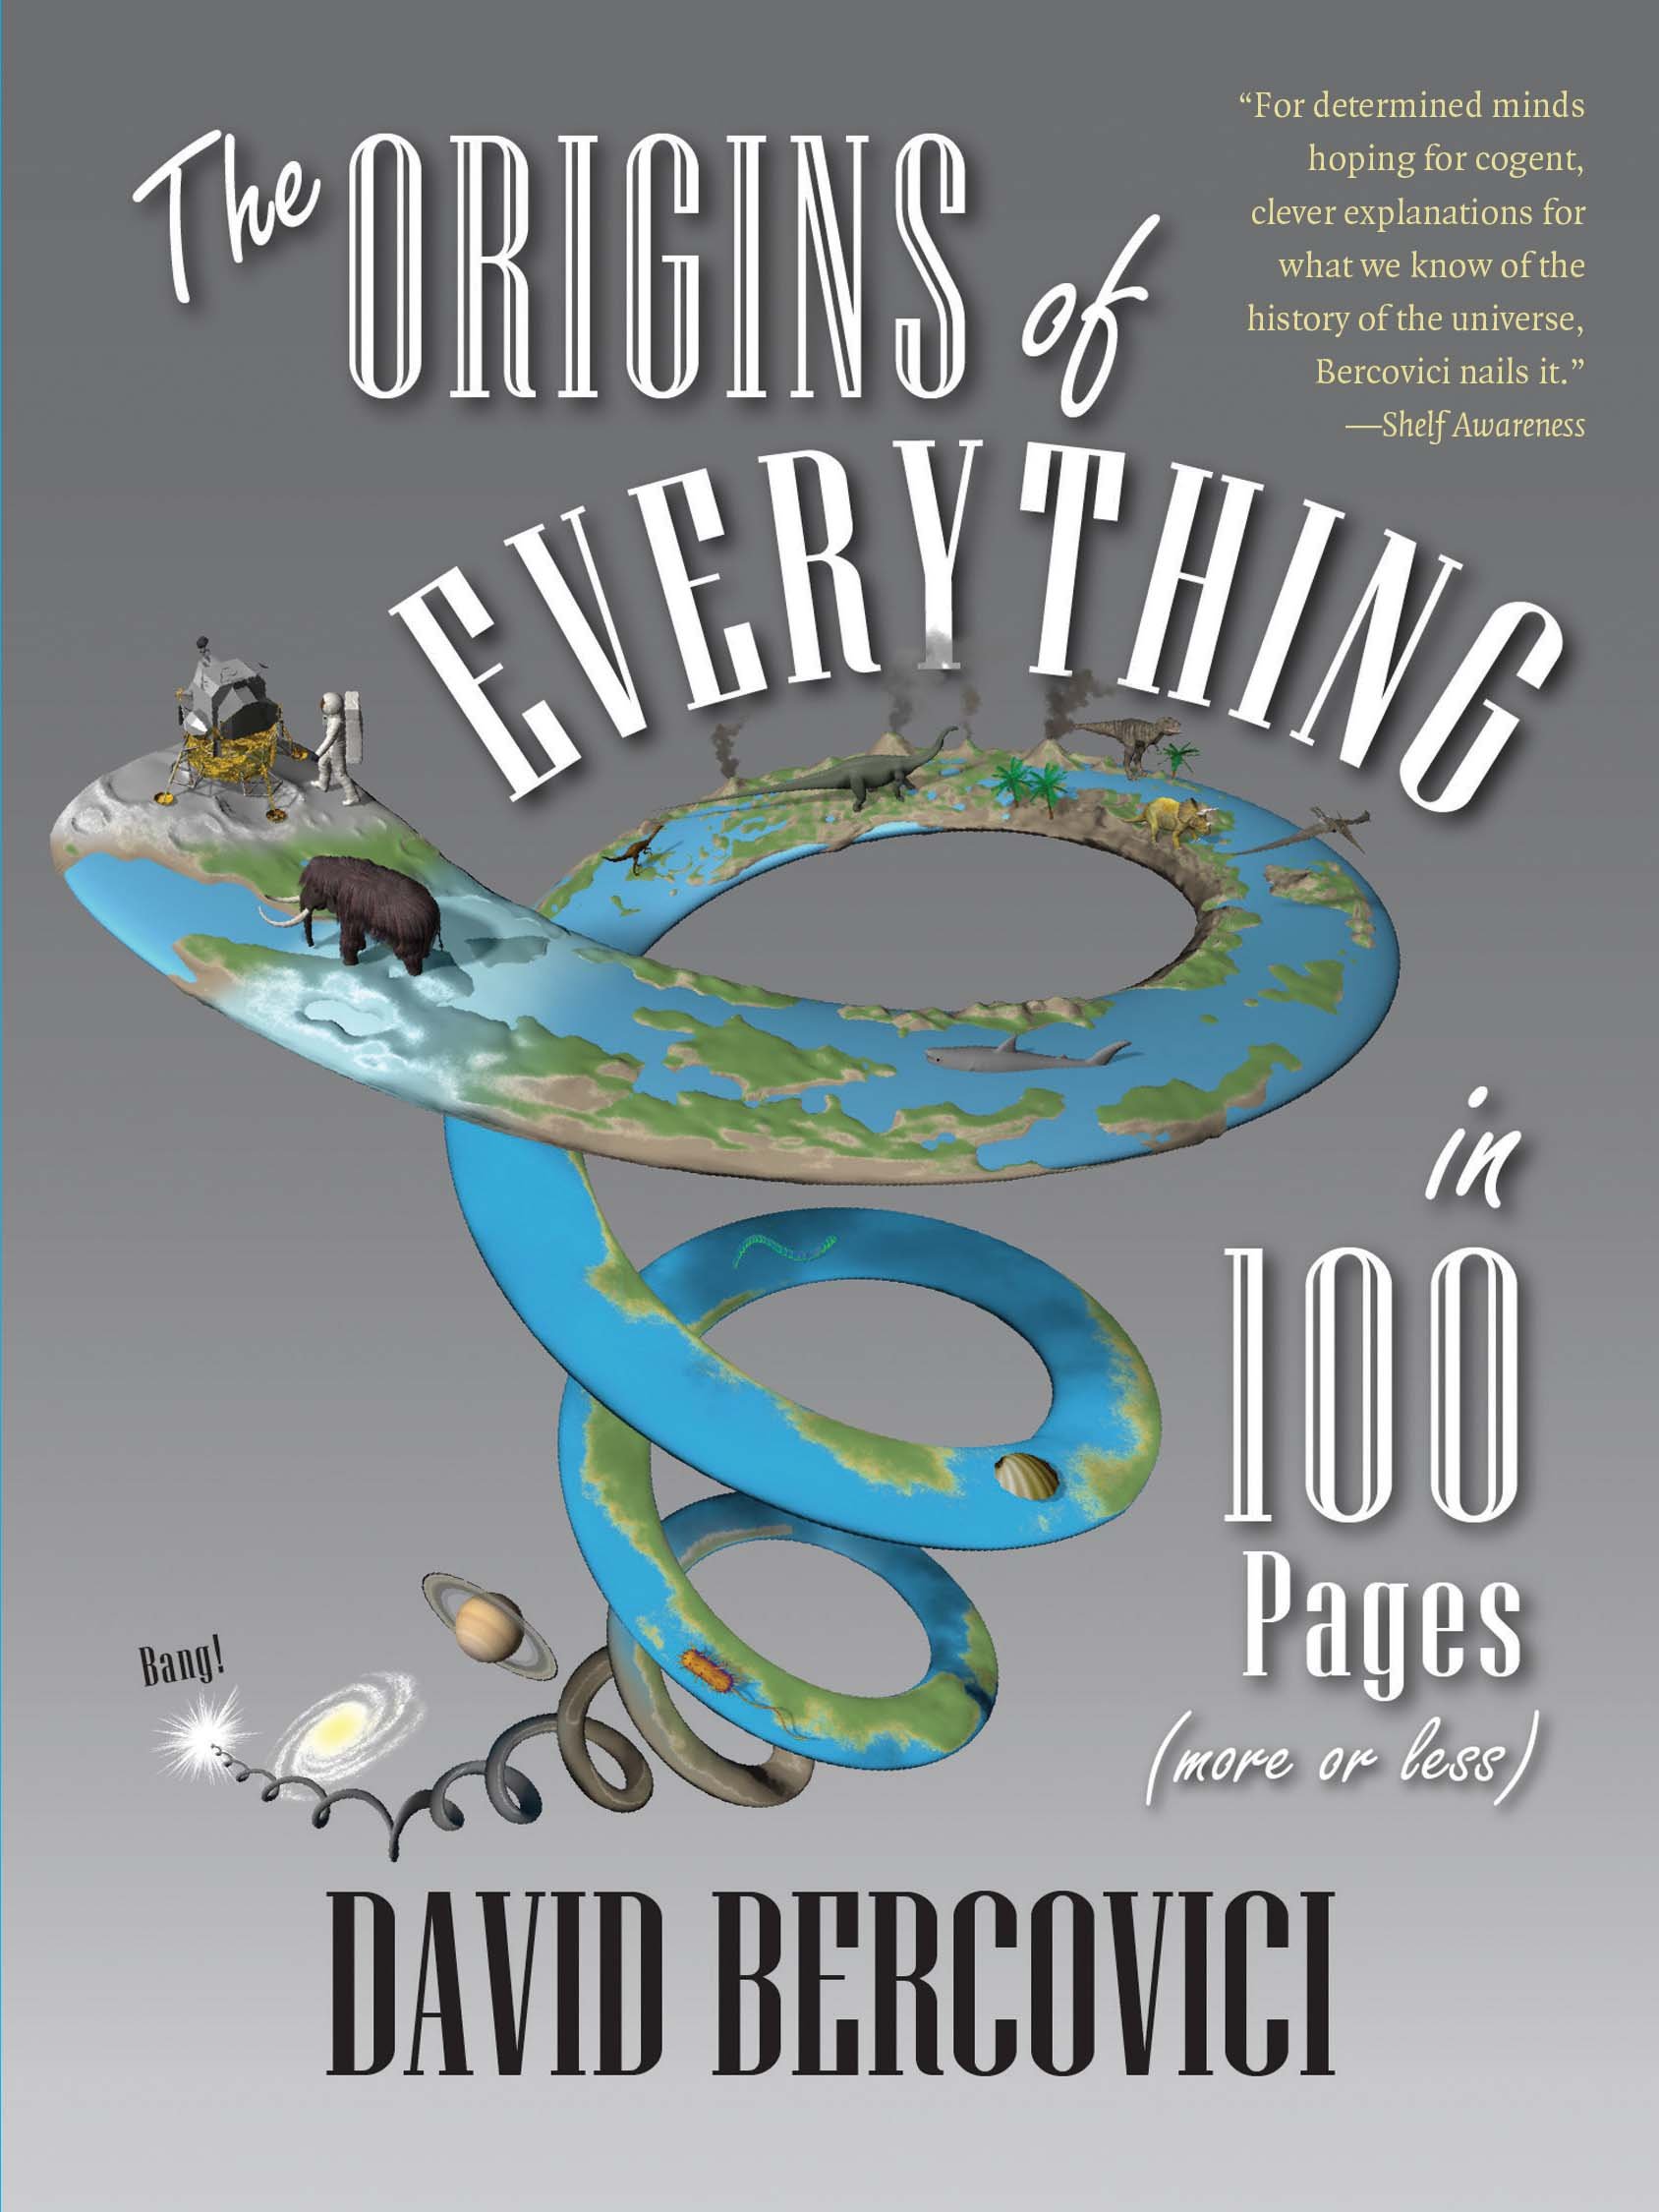 The Origins of Everything in 100 Pages (More or Less) | David Bercovici